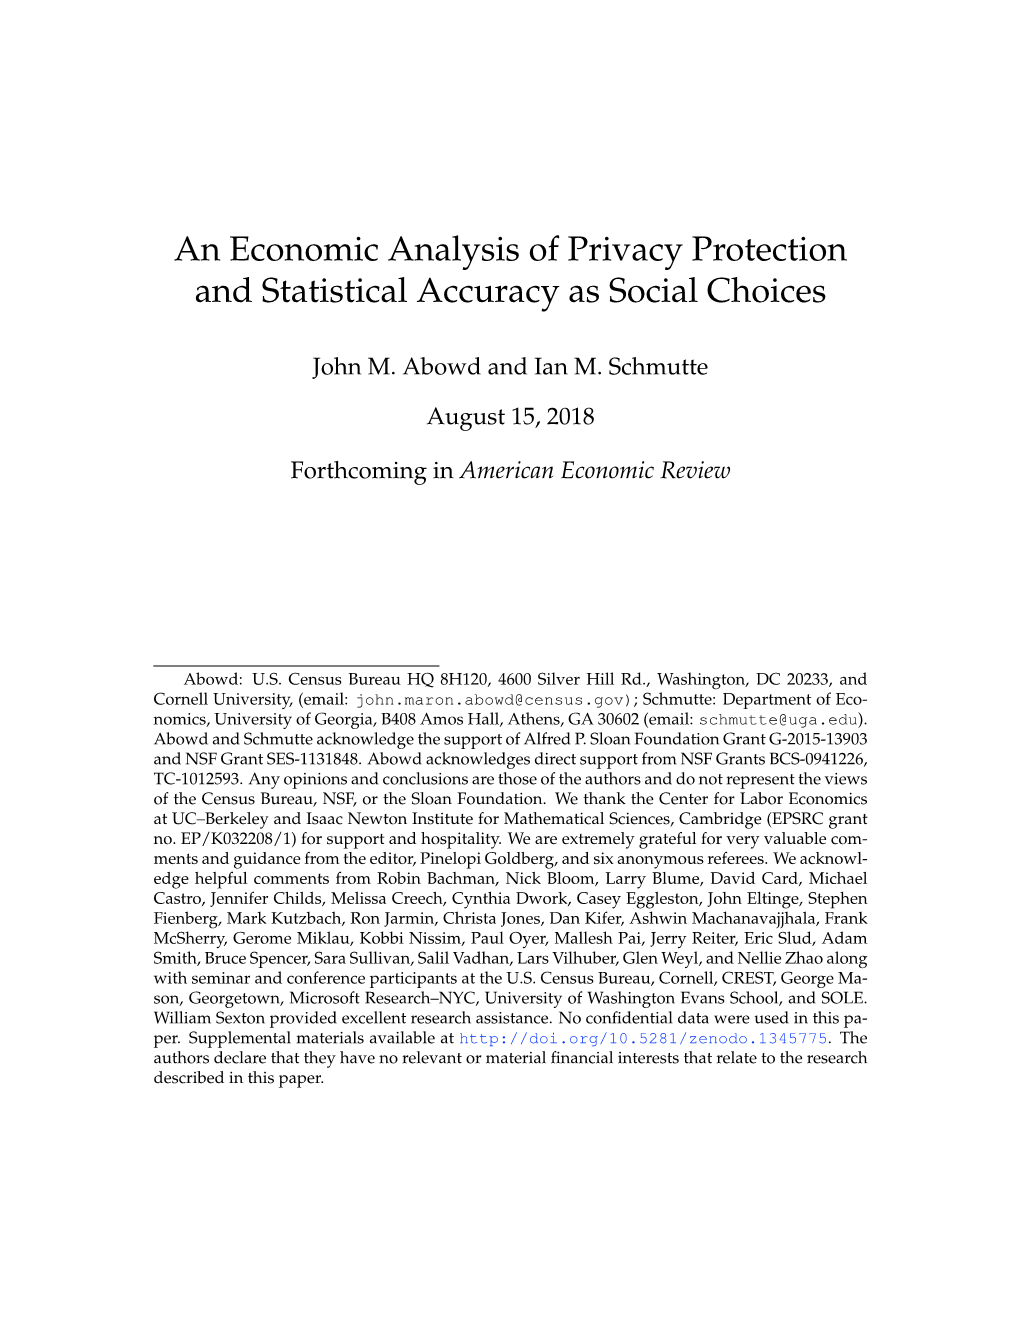 An Economic Analysis of Privacy Protection and Statistical Accuracy As Social Choices